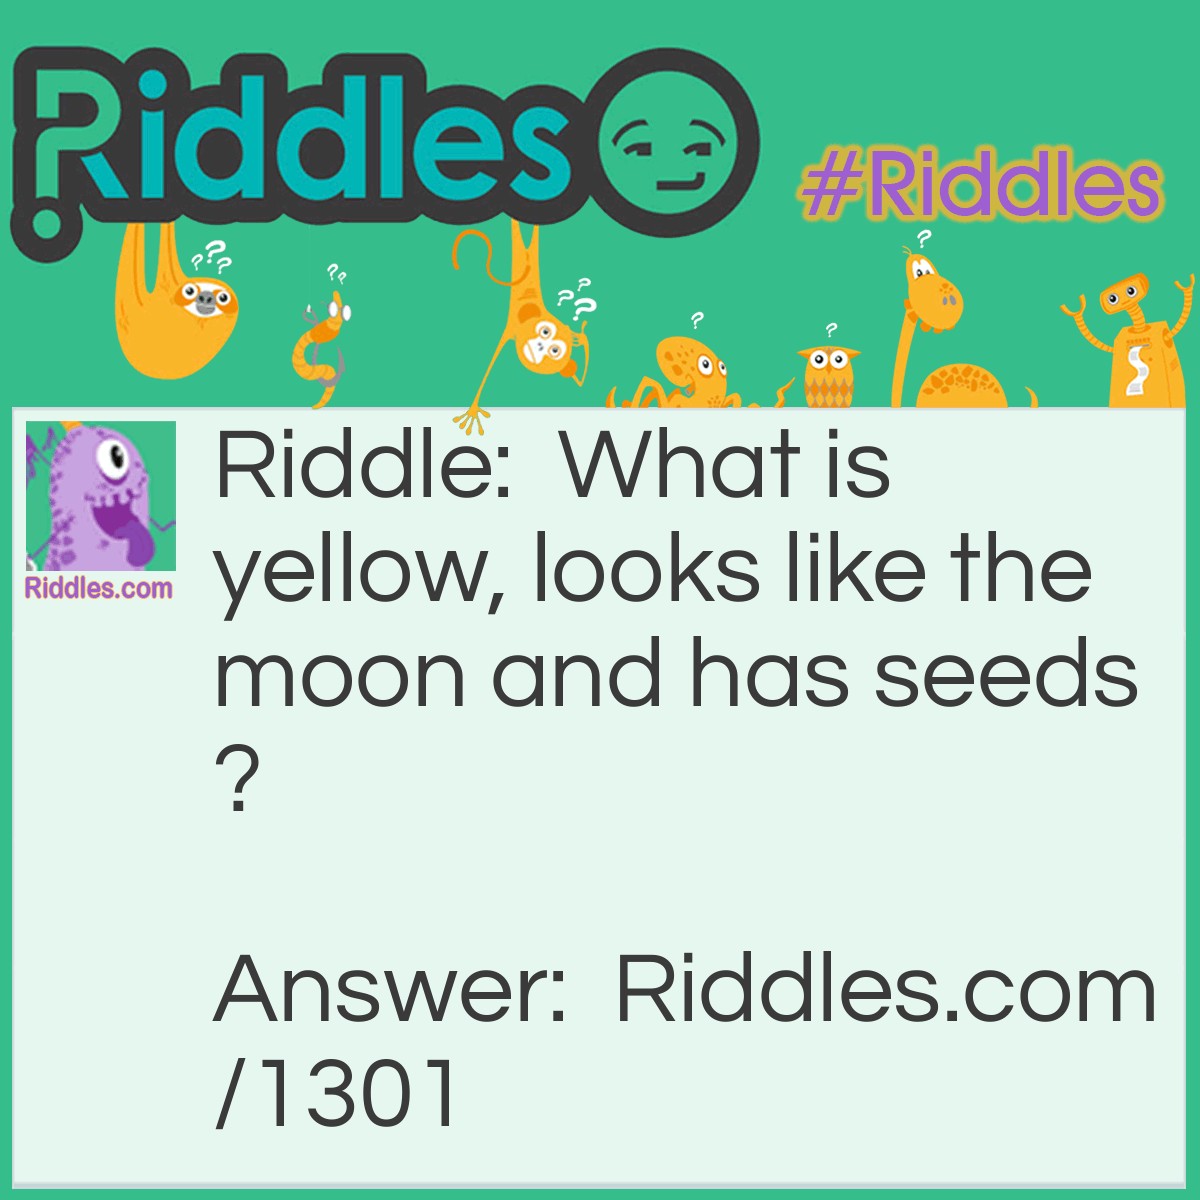 Riddle: What is yellow, looks like the moon and has seeds? Answer: A Banana.